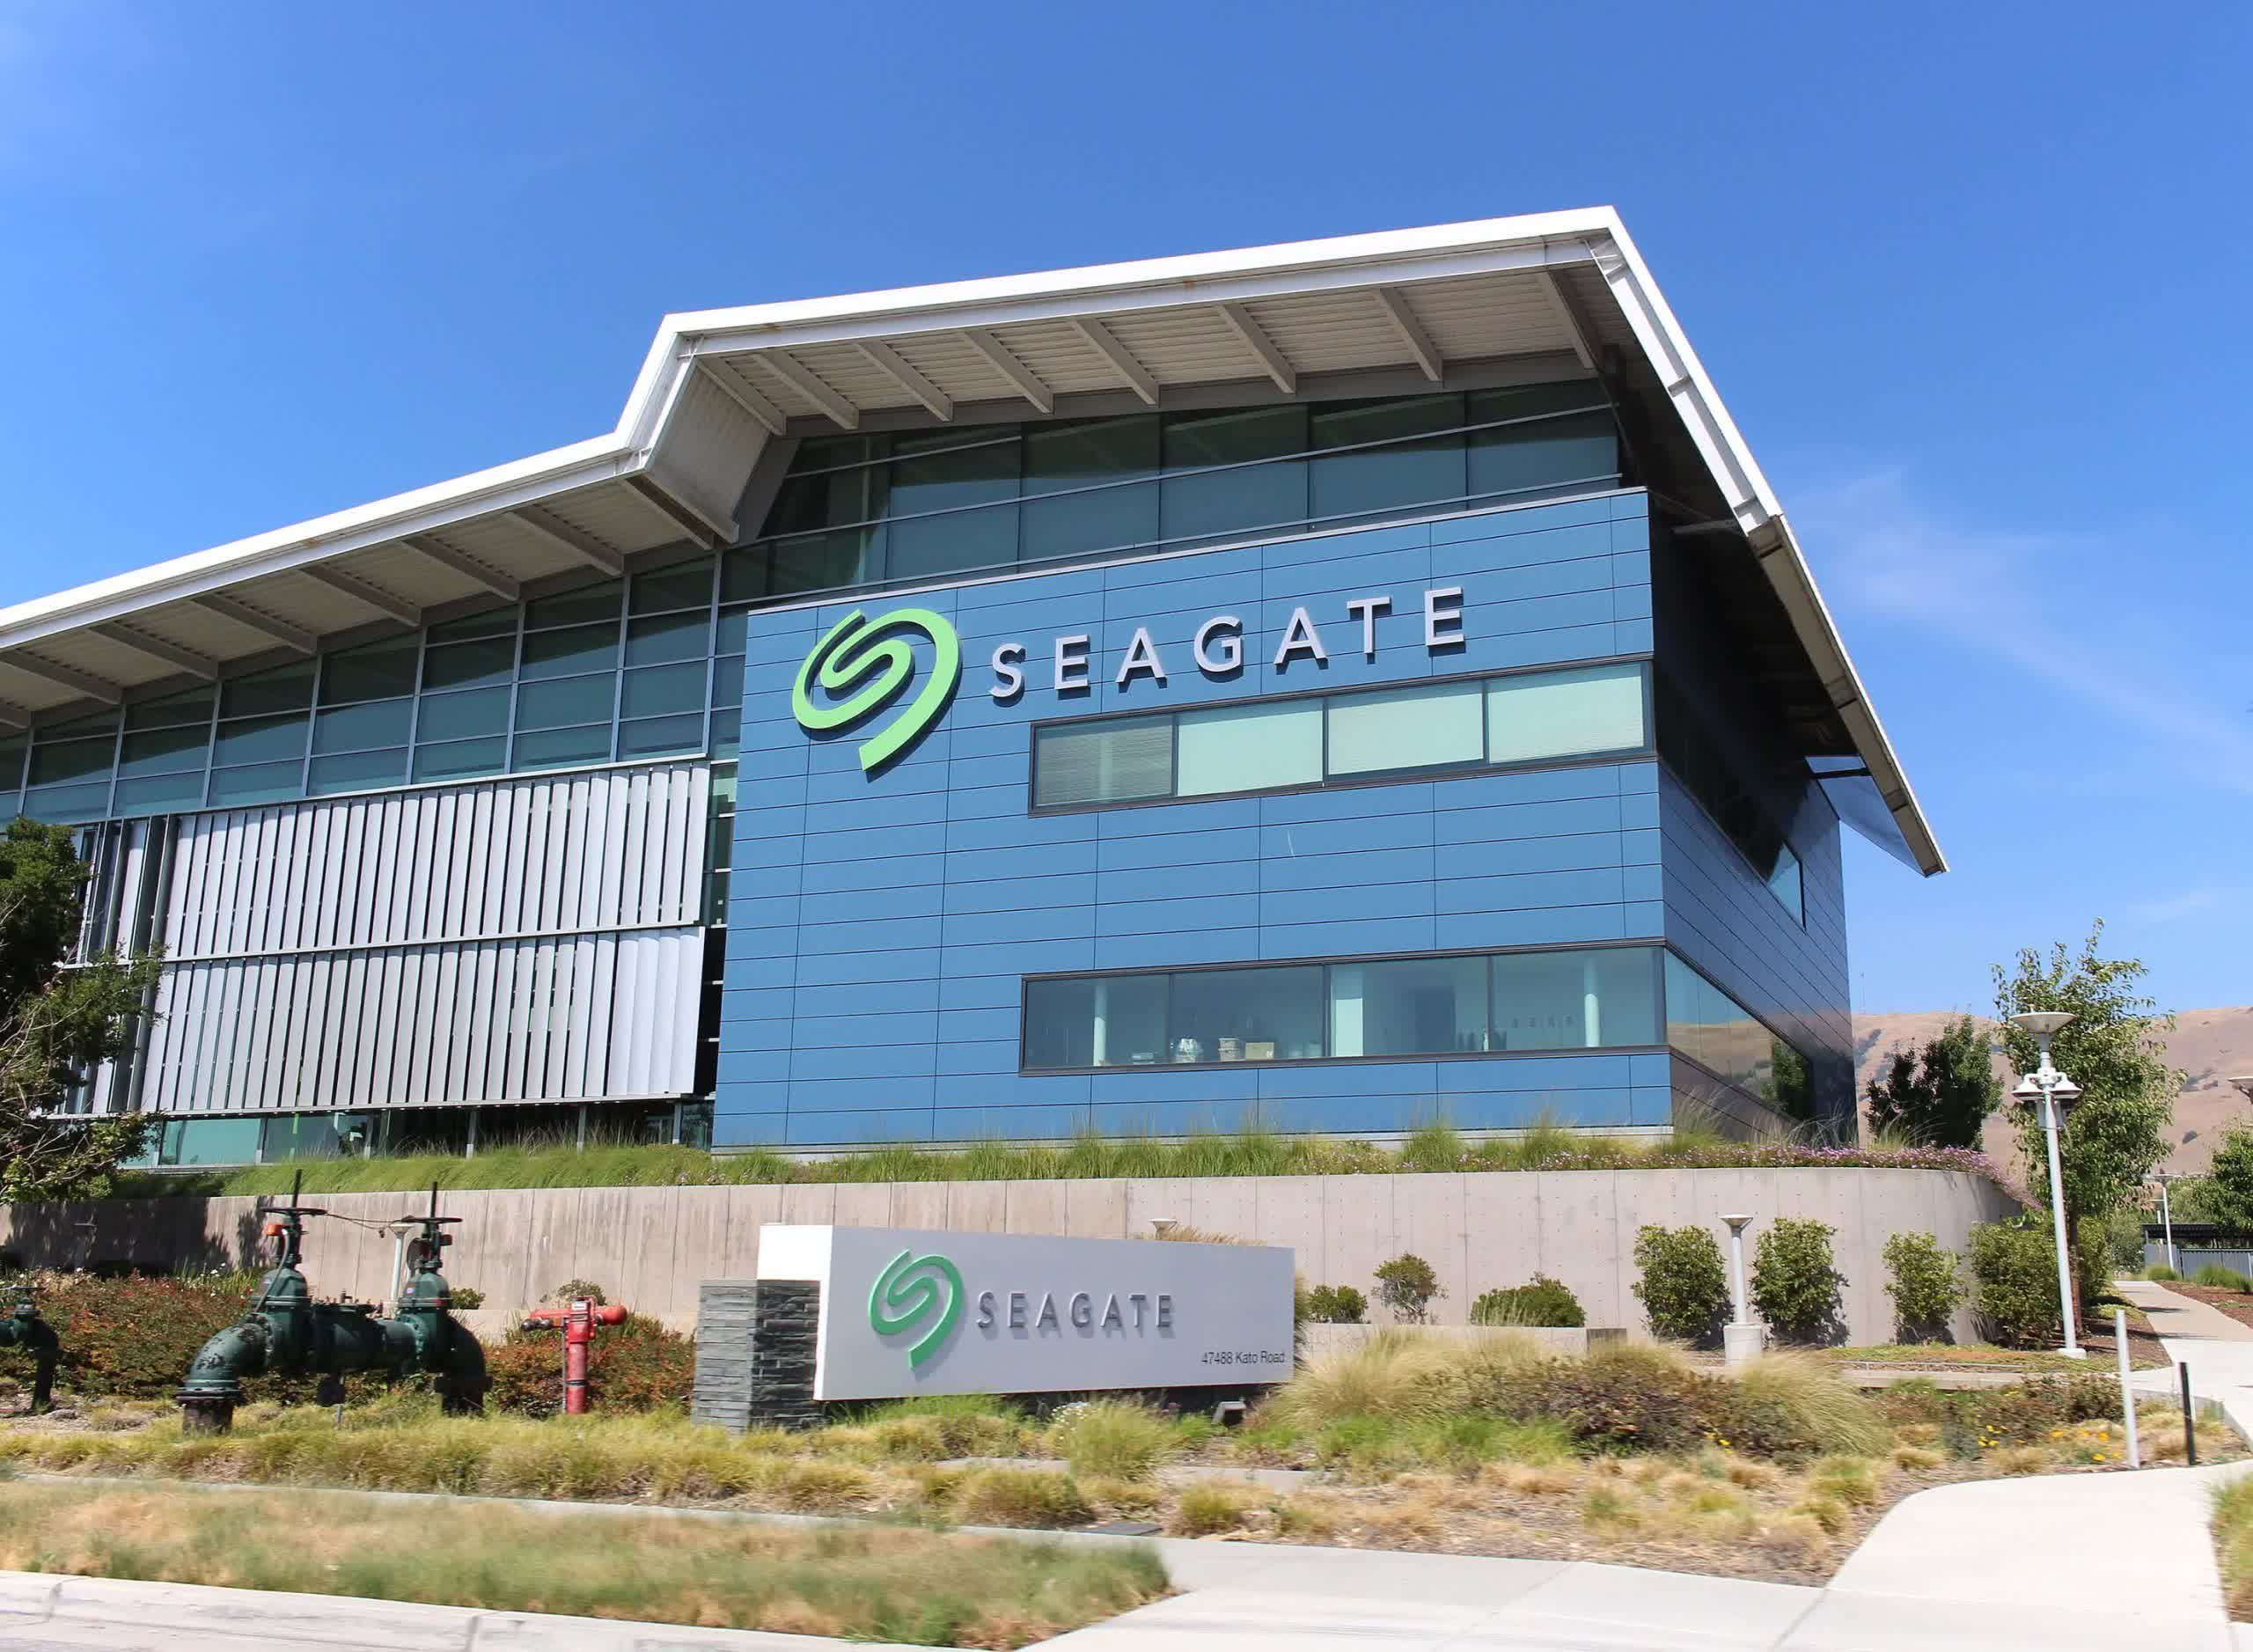 Seagate fined $300 million for selling hard drives to sanctioned Huawei